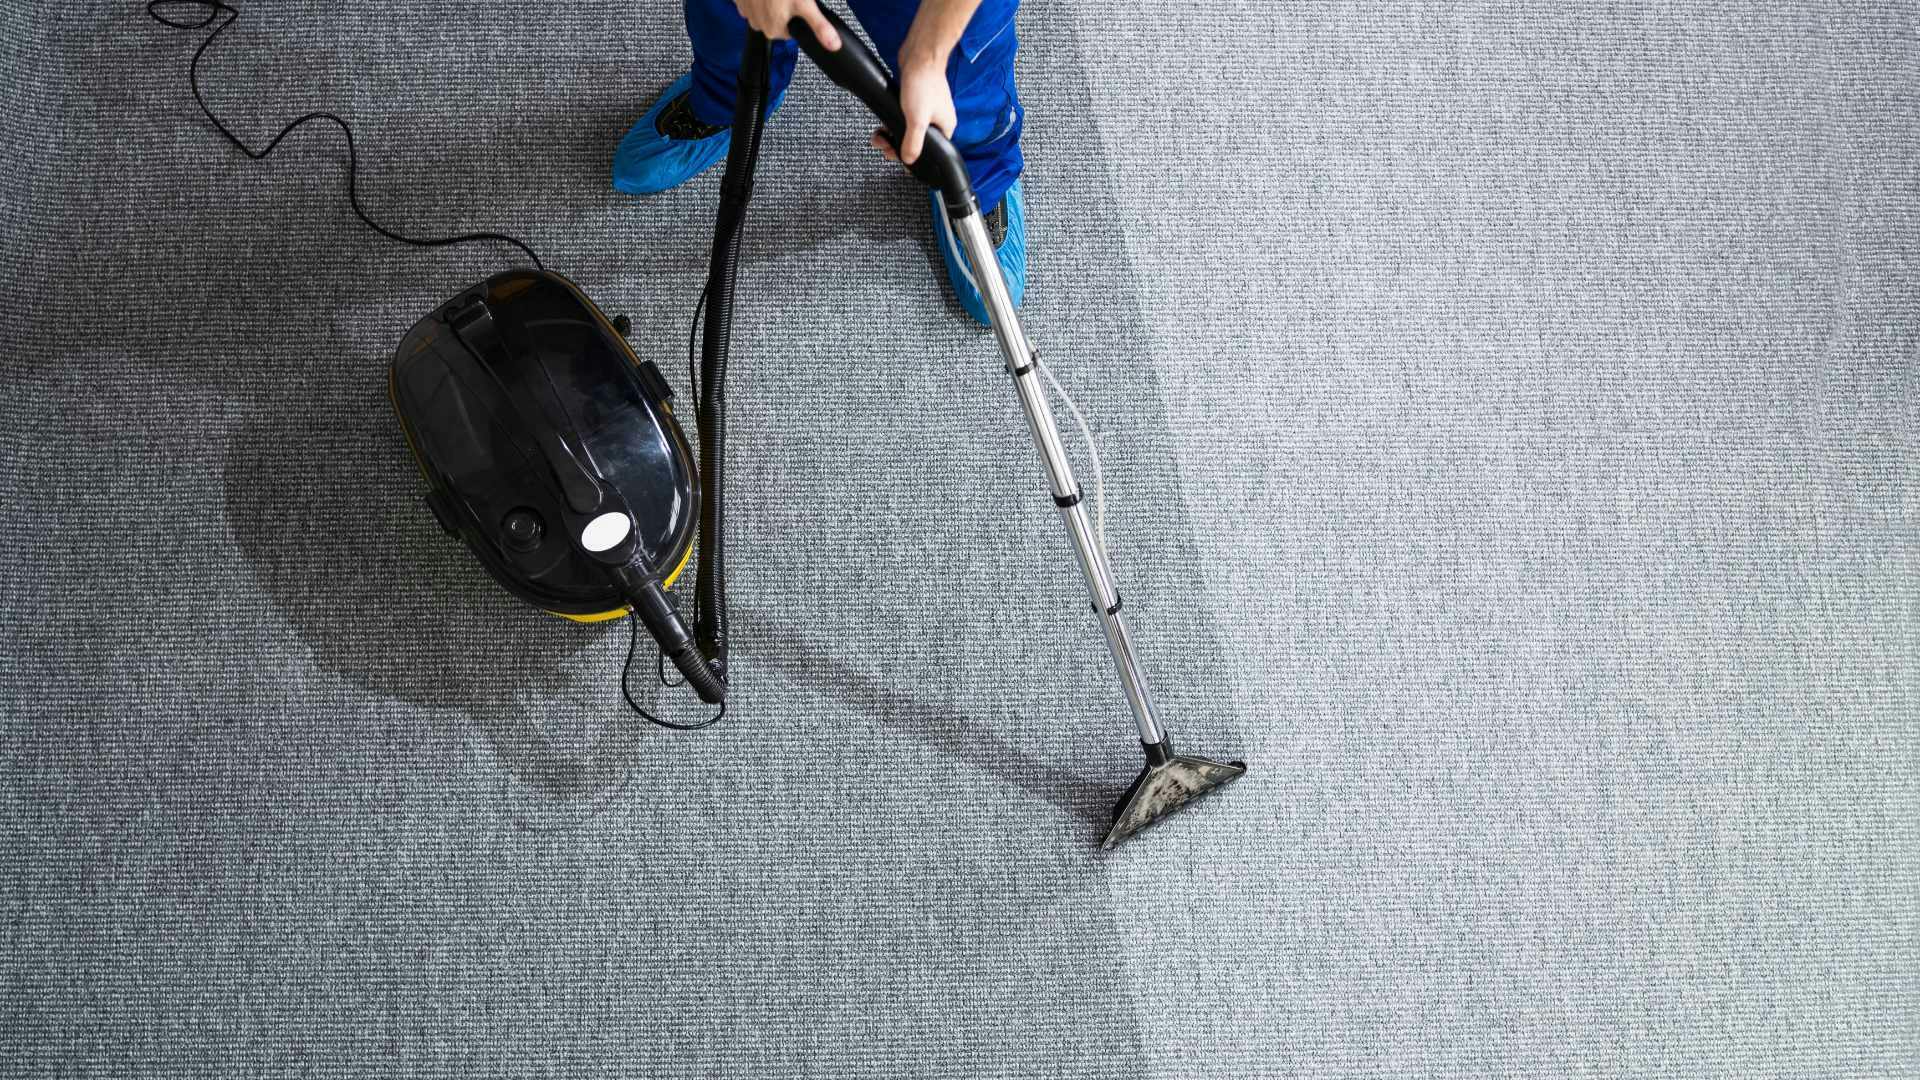 Carpet cleaning service removing dirt and grime from carpet with vacuum.